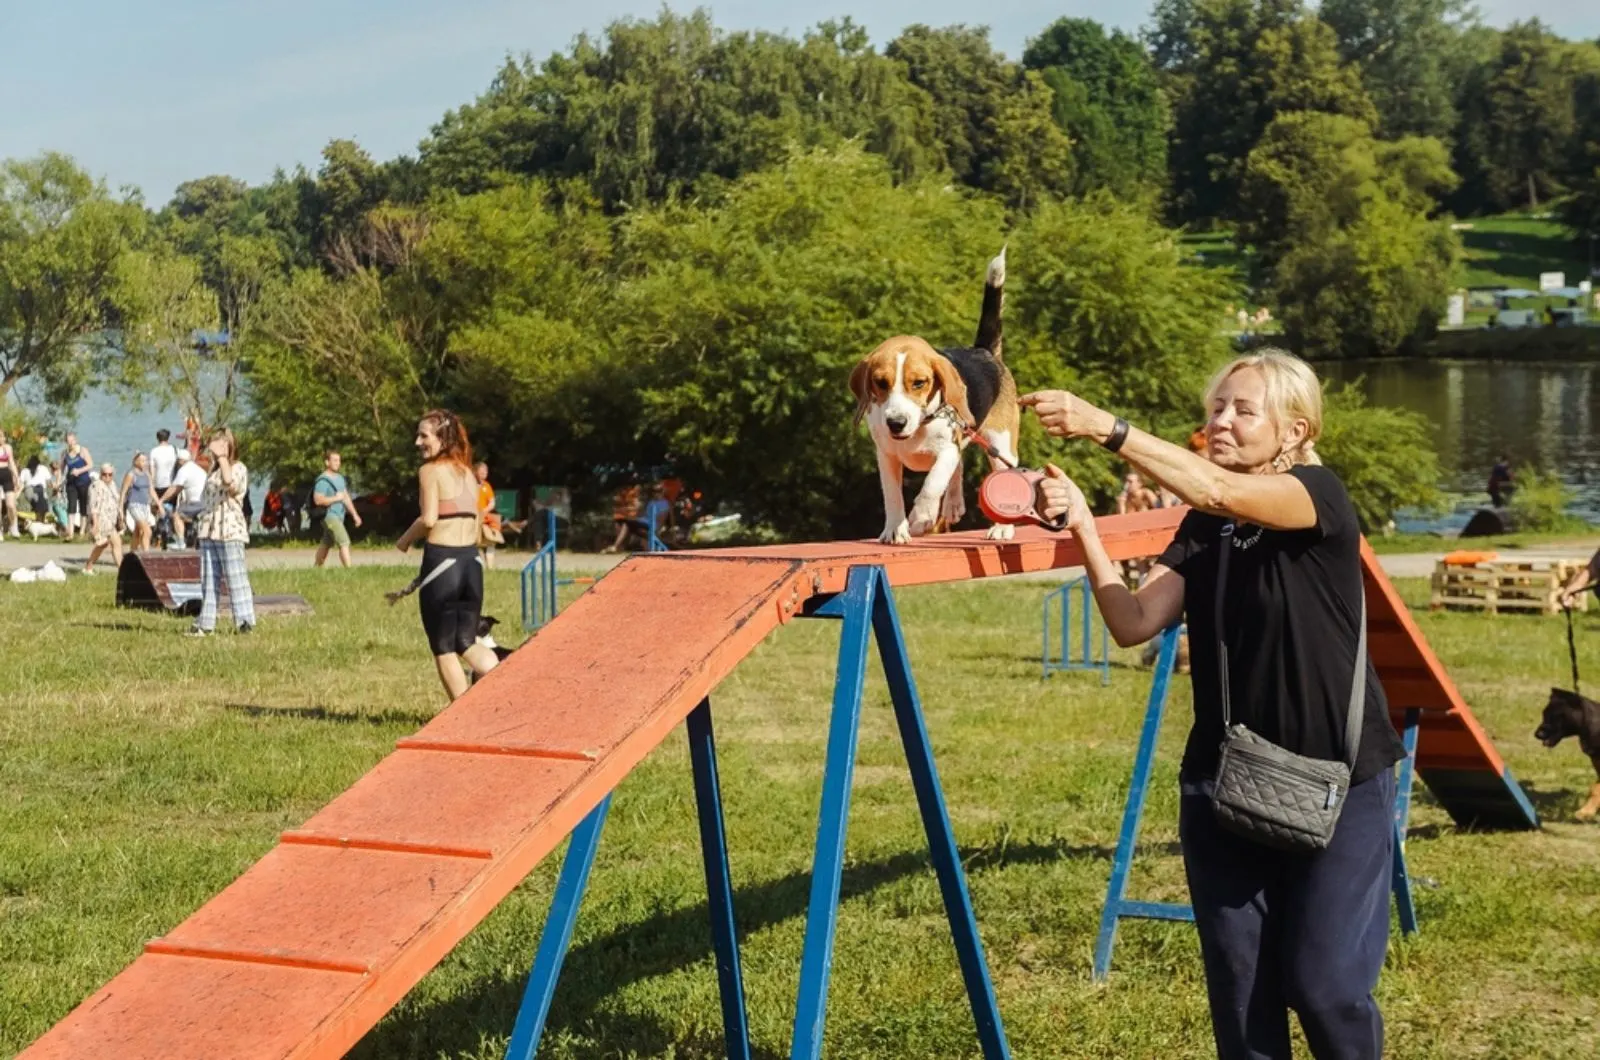 woman training her dog on a playground